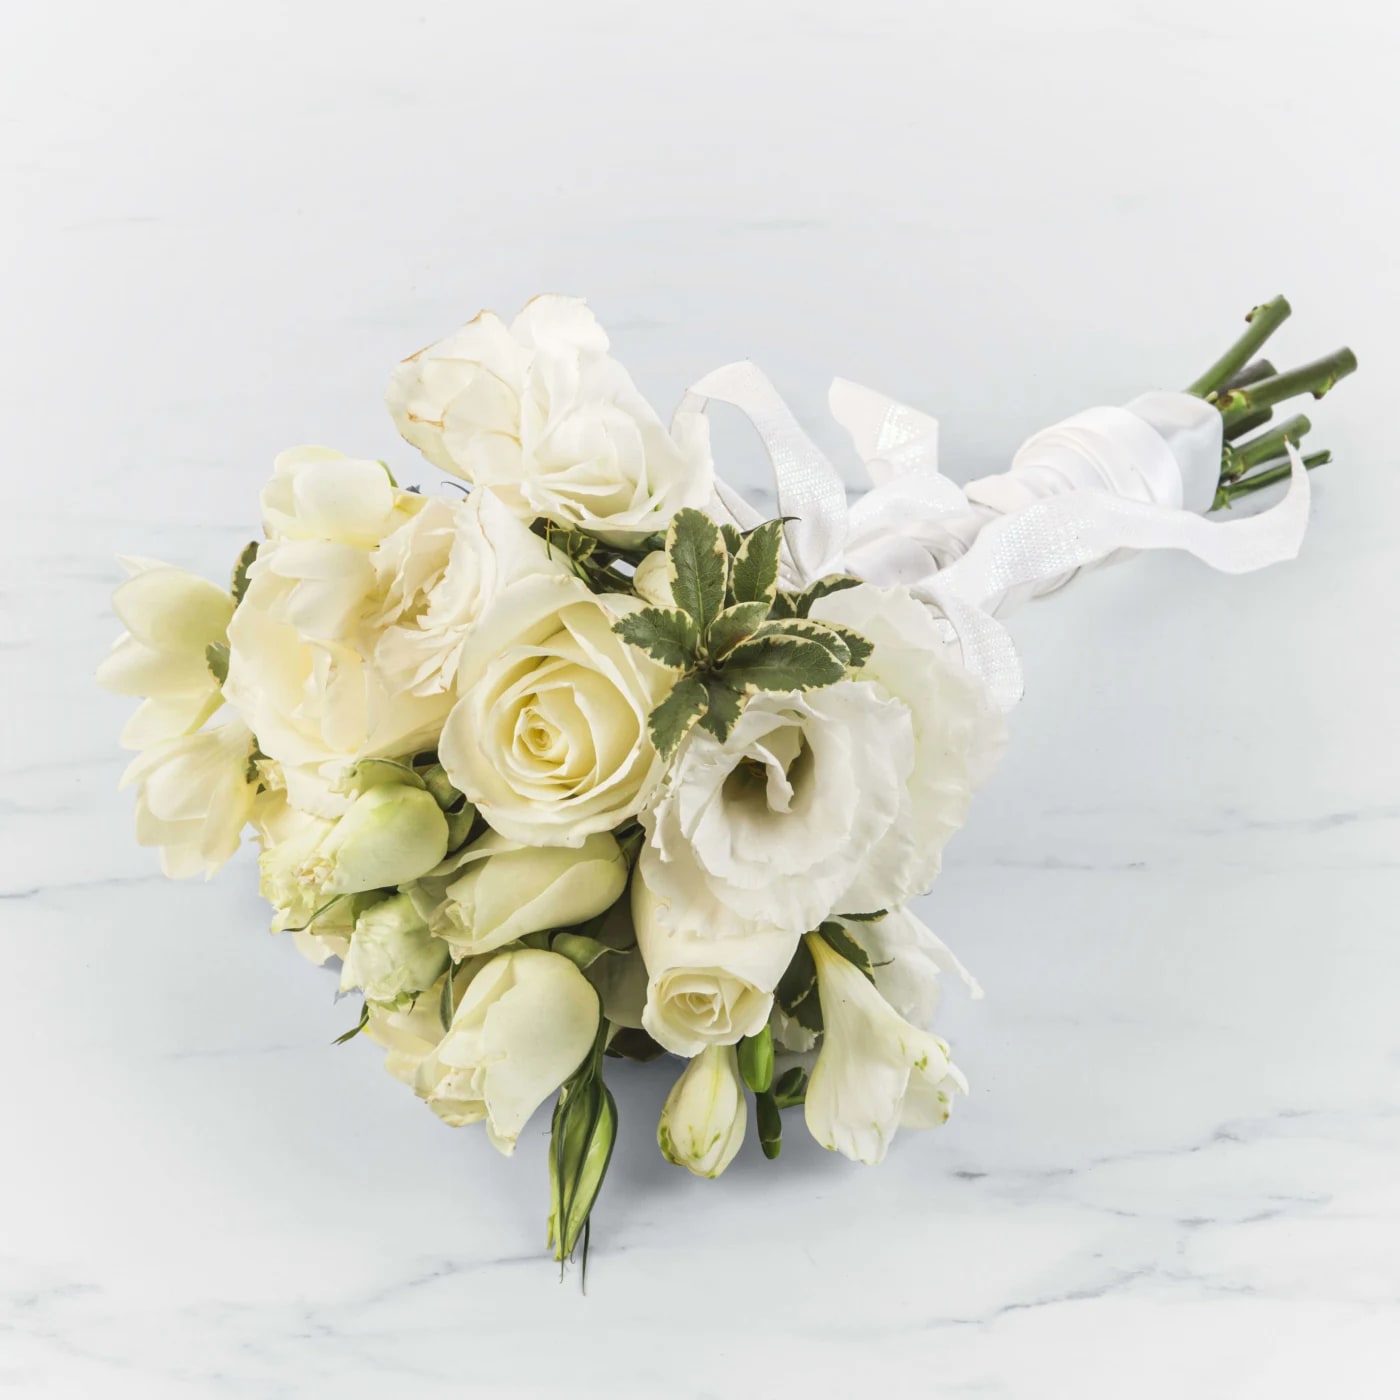 White Rose Bouquet by BloomNation™  - A classic white rose bouquet hand tied with ribbon. The perfect accessory for any formal event including proms, weddings, and debutante balls.  